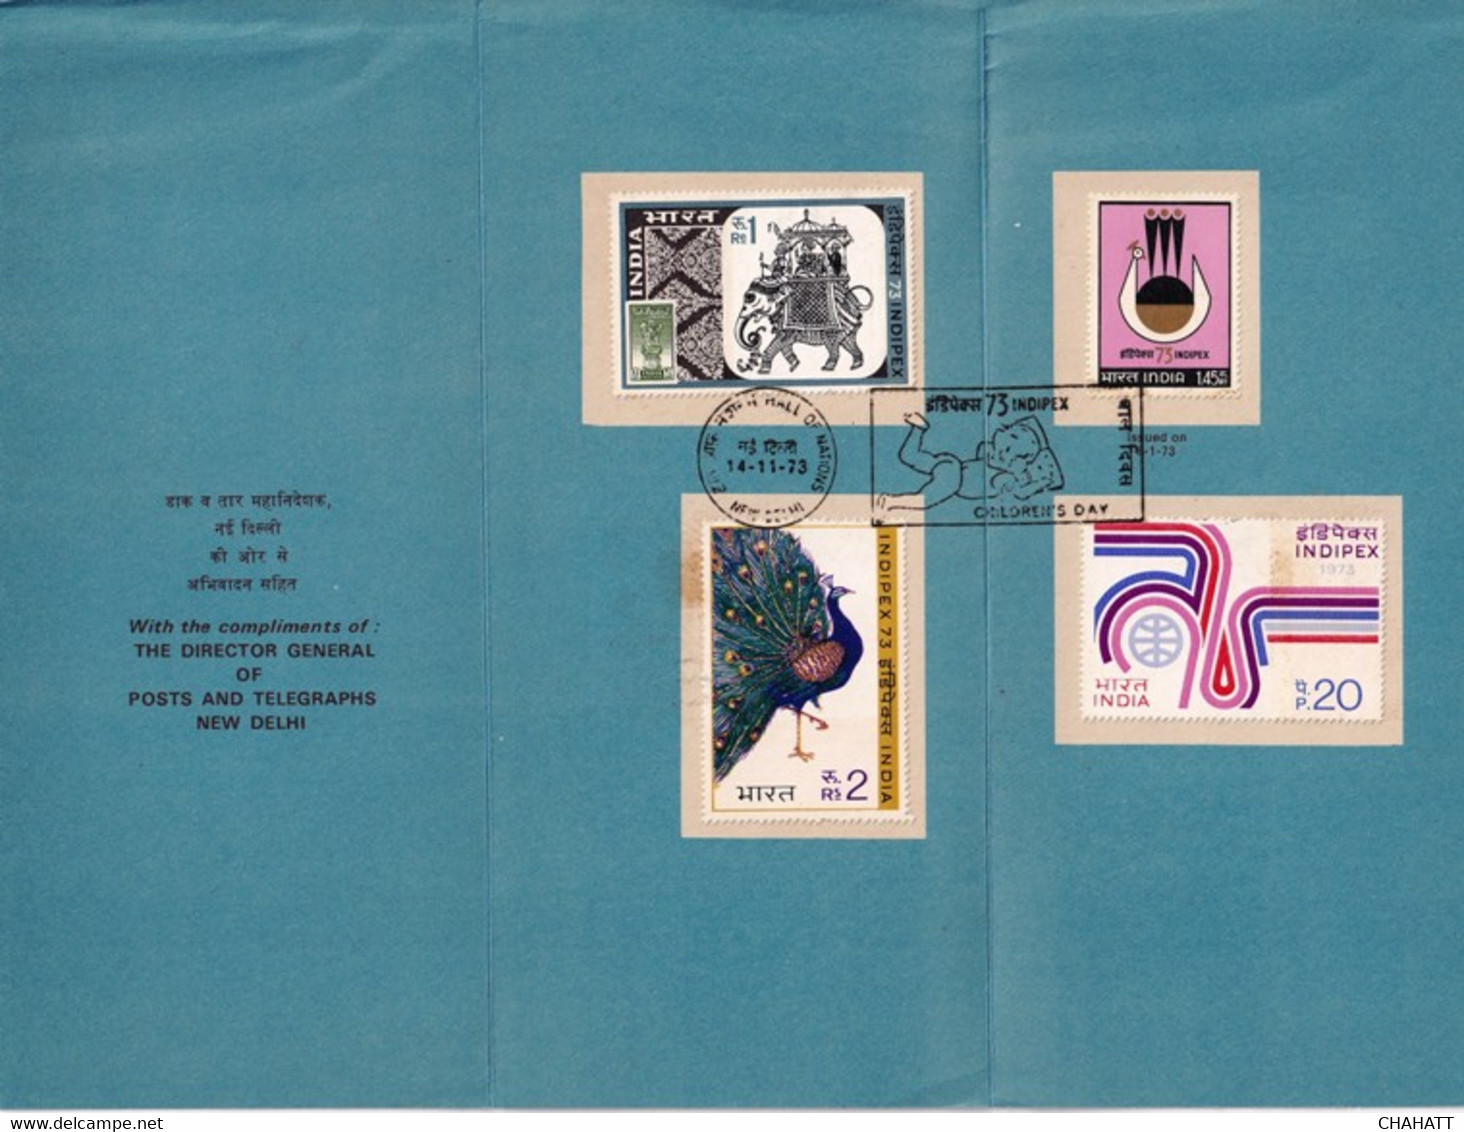 INDIPEX - 73 - PEACOCK AND OTHERS - FIRST DAY CANCEL- INFORMATION BROCHURE-SCARCE-BX2-38 - Collections, Lots & Series